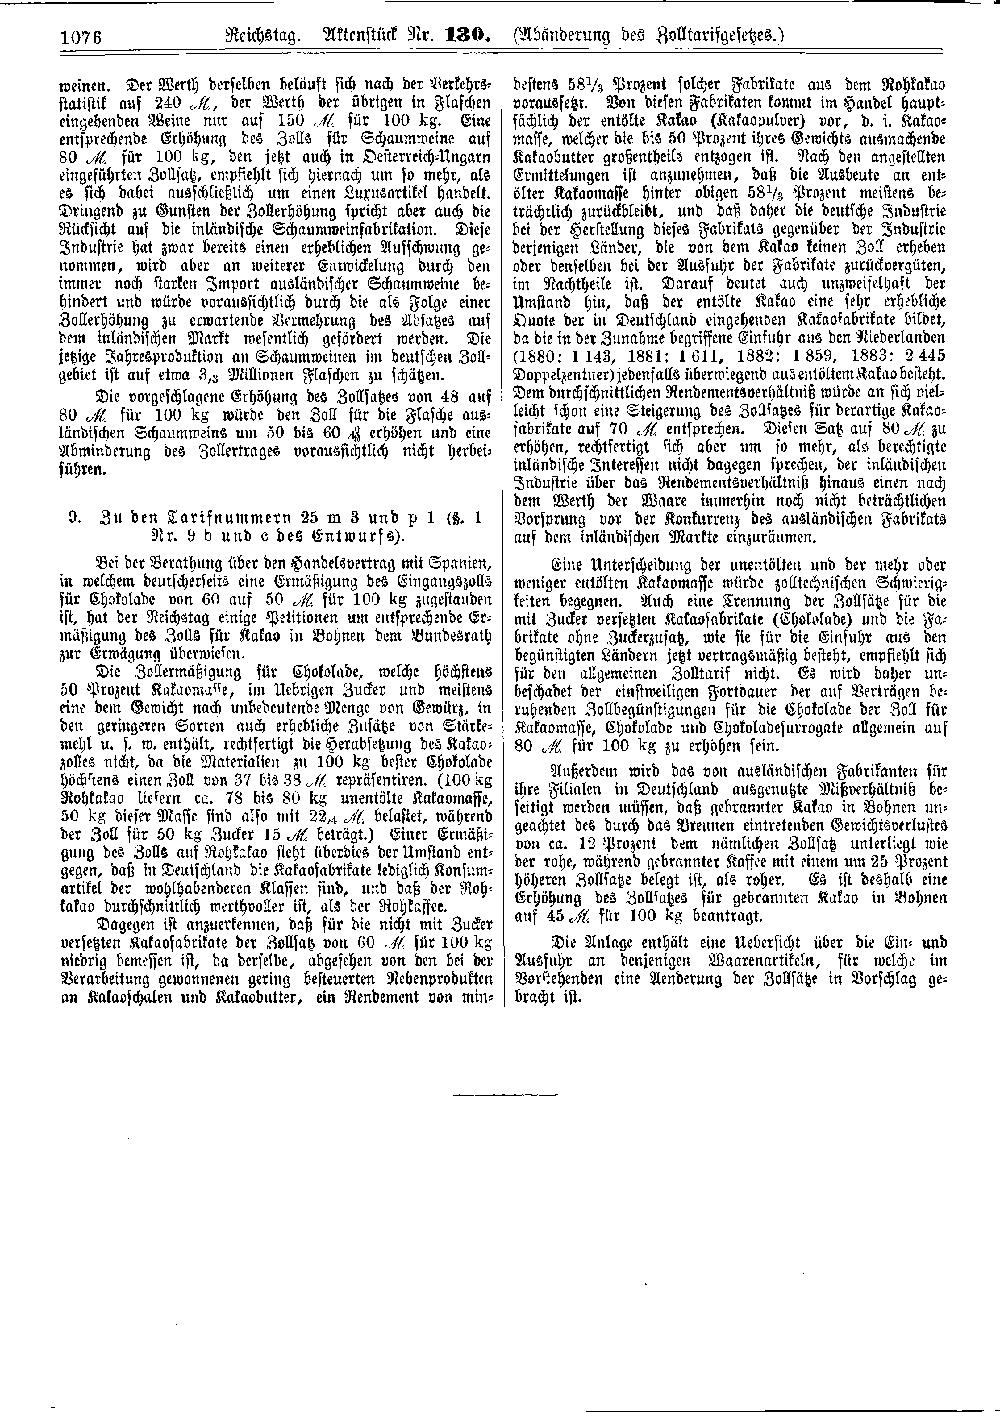 Scan of page 1076